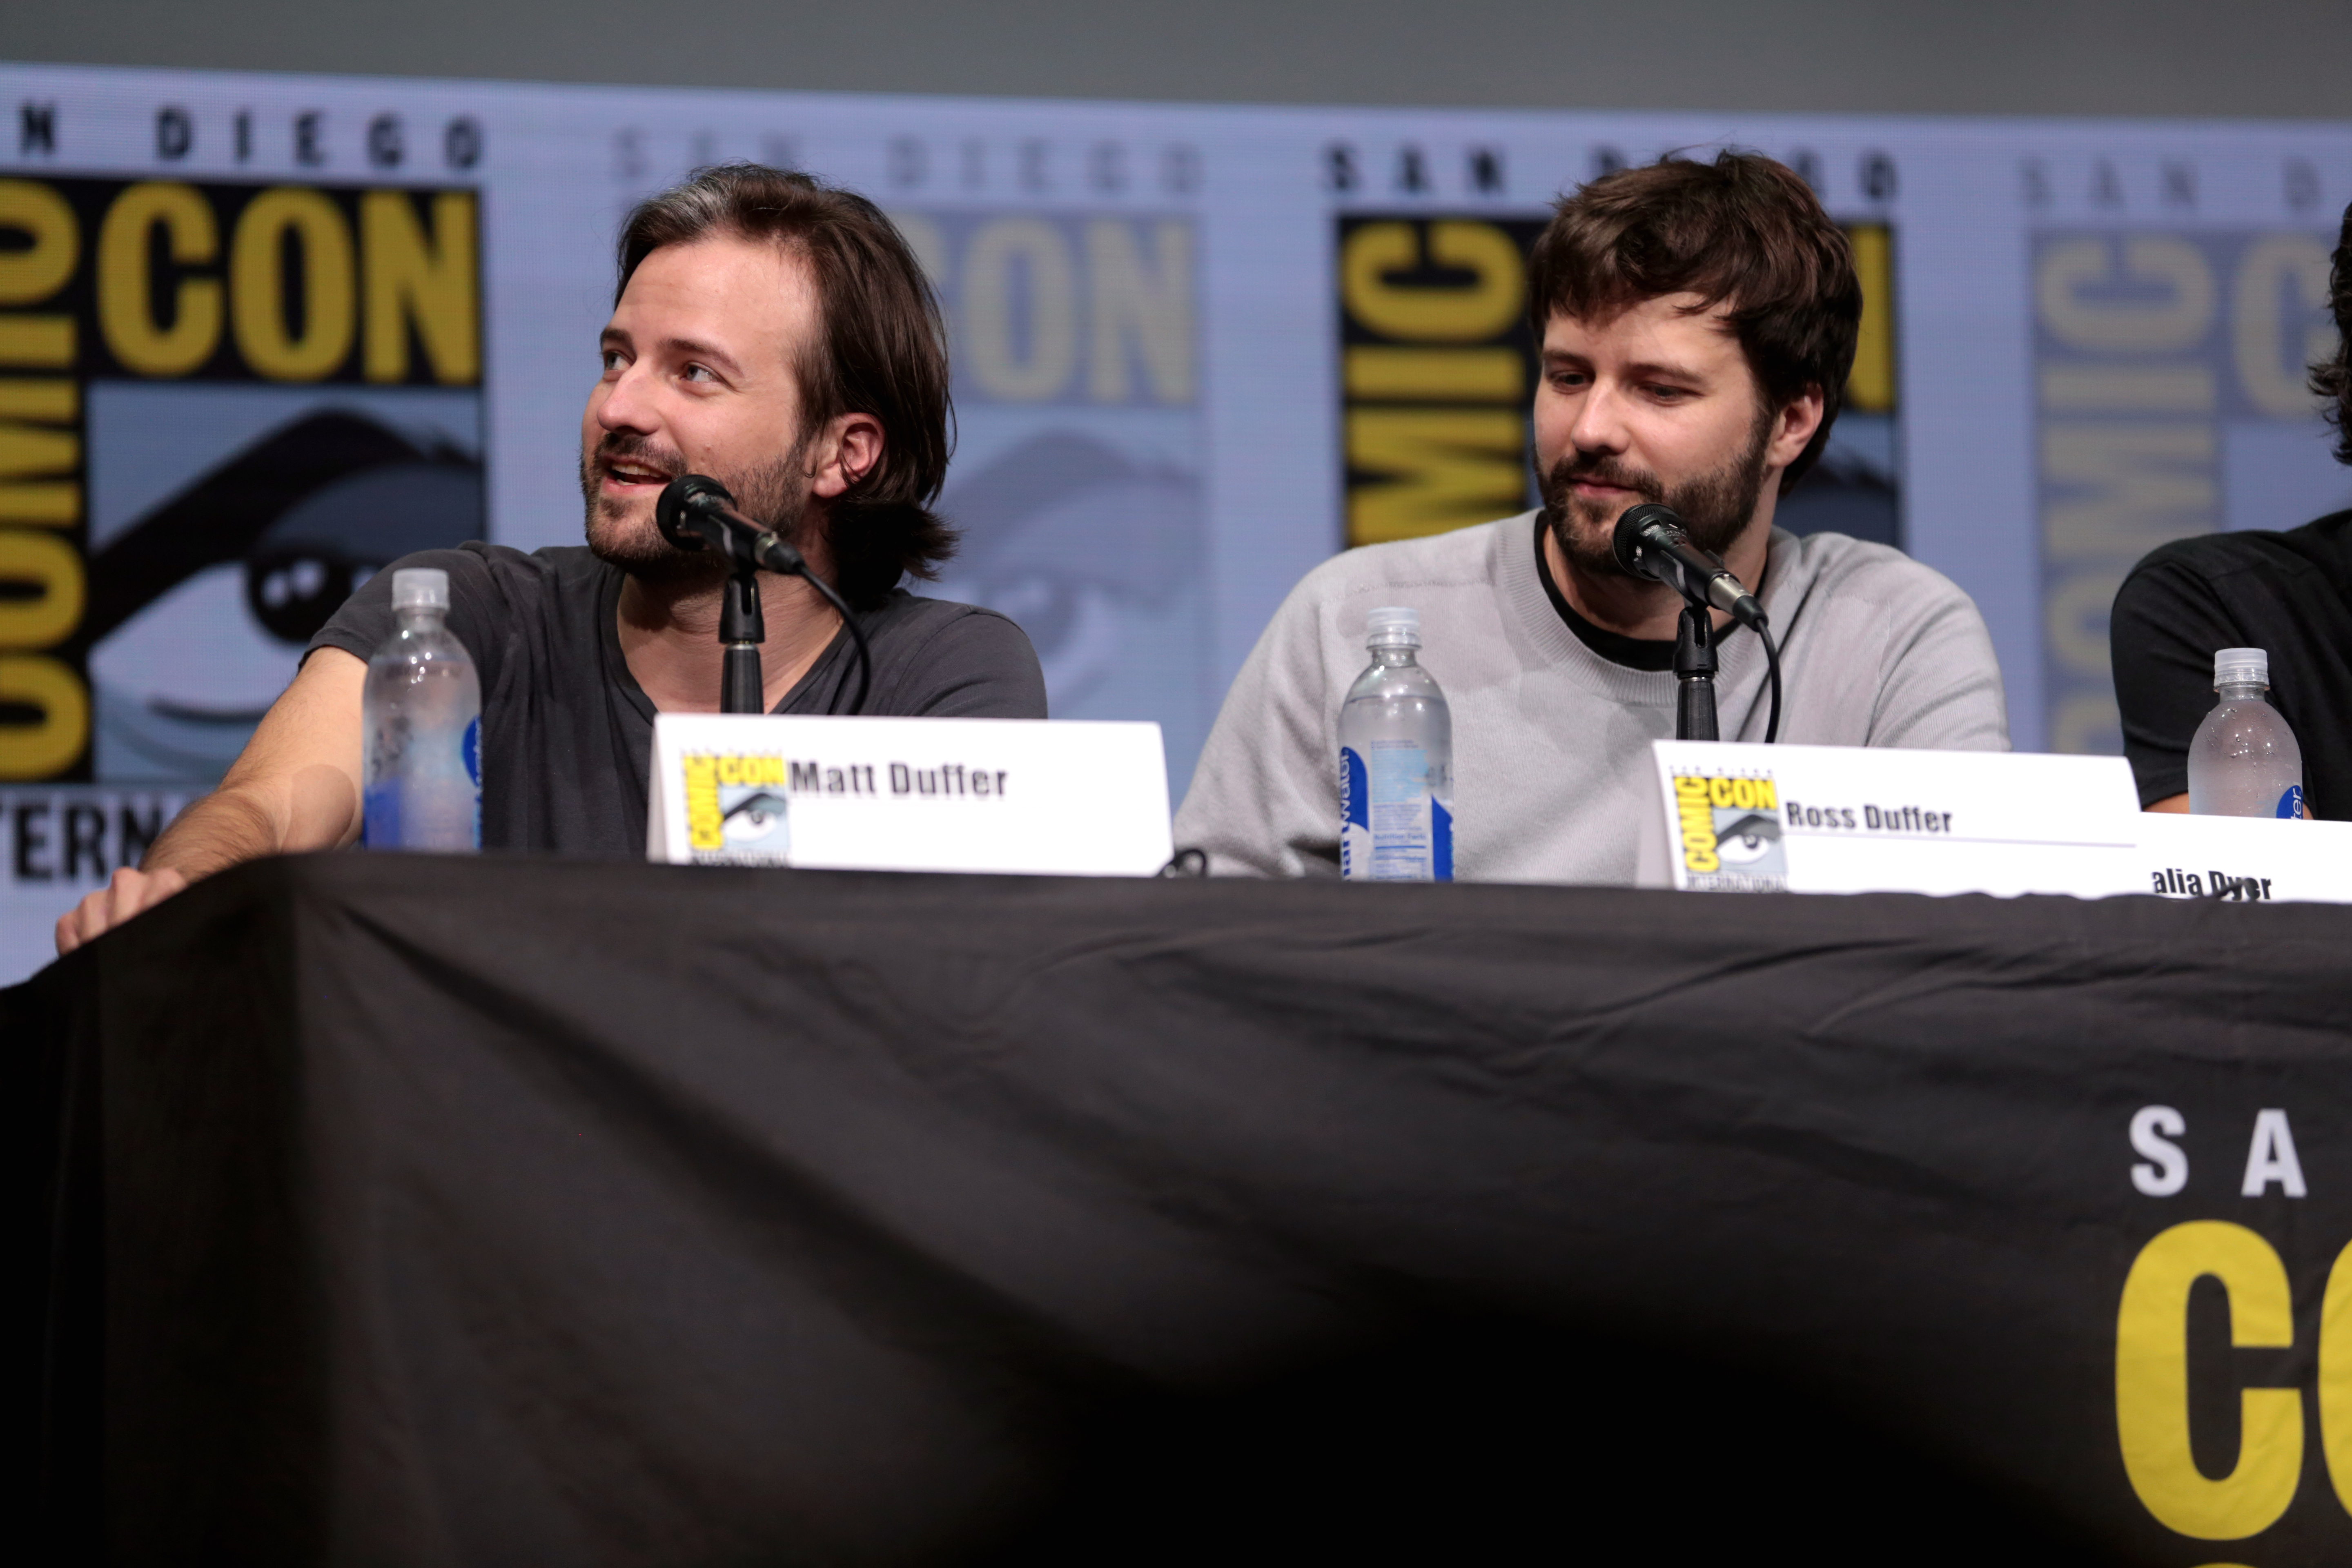 The Duffer Brothers